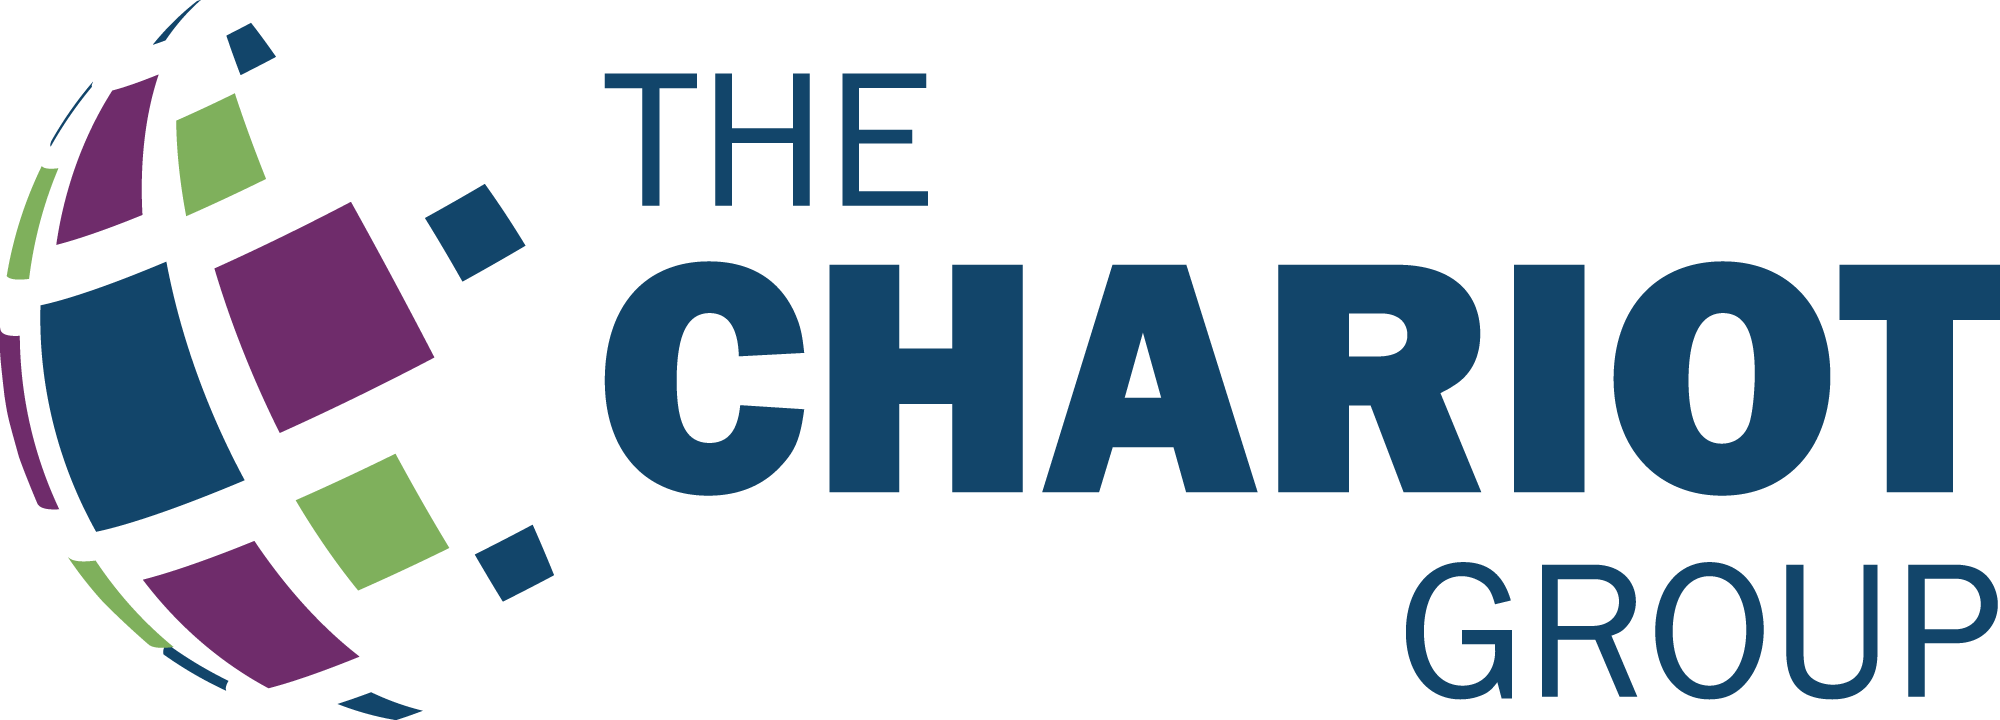 The Chariot Group logo